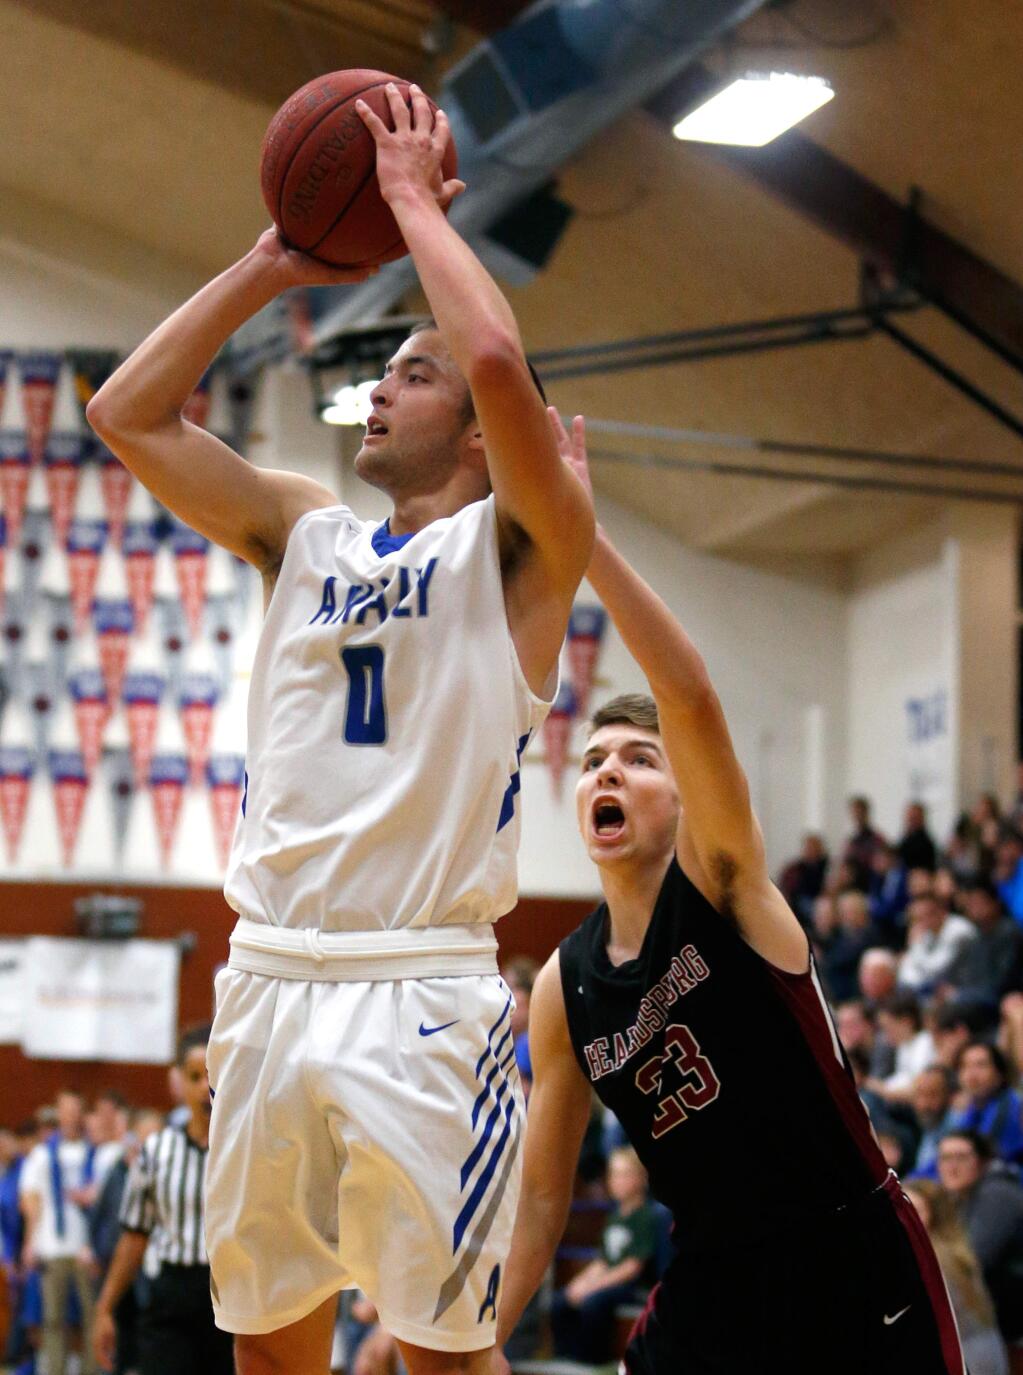 Analy's Nick Fujii (0) shoots a jump shot during a game on Feb. 18, 2016. Fujii was selected by league coaches as co-MVP of the Sonoma County League. (Alvin Jornada / The Press Democrat)